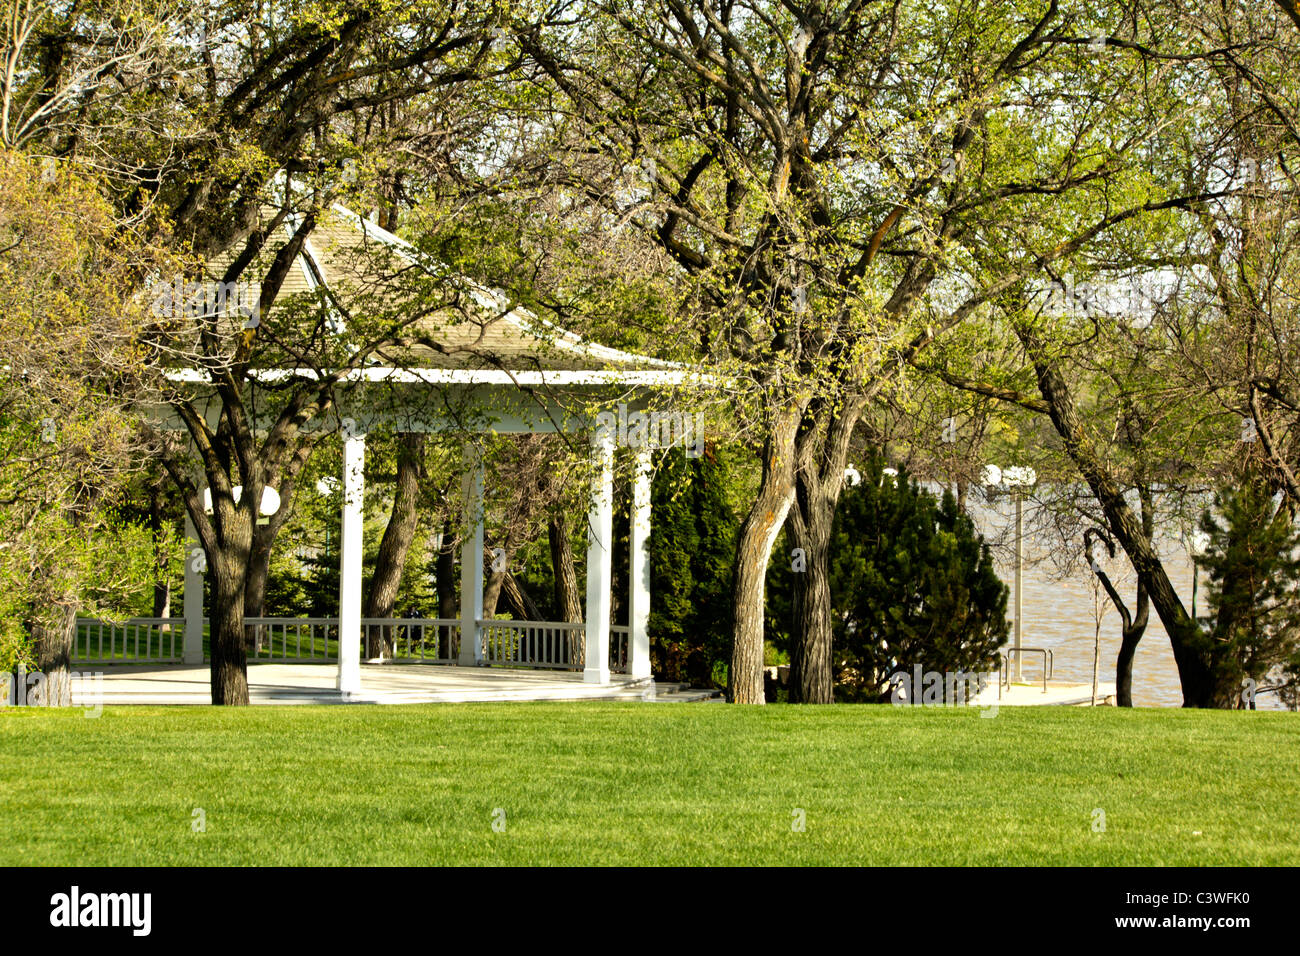 A white gazebo in a public park overseeing Wascana Lake Stock Photo